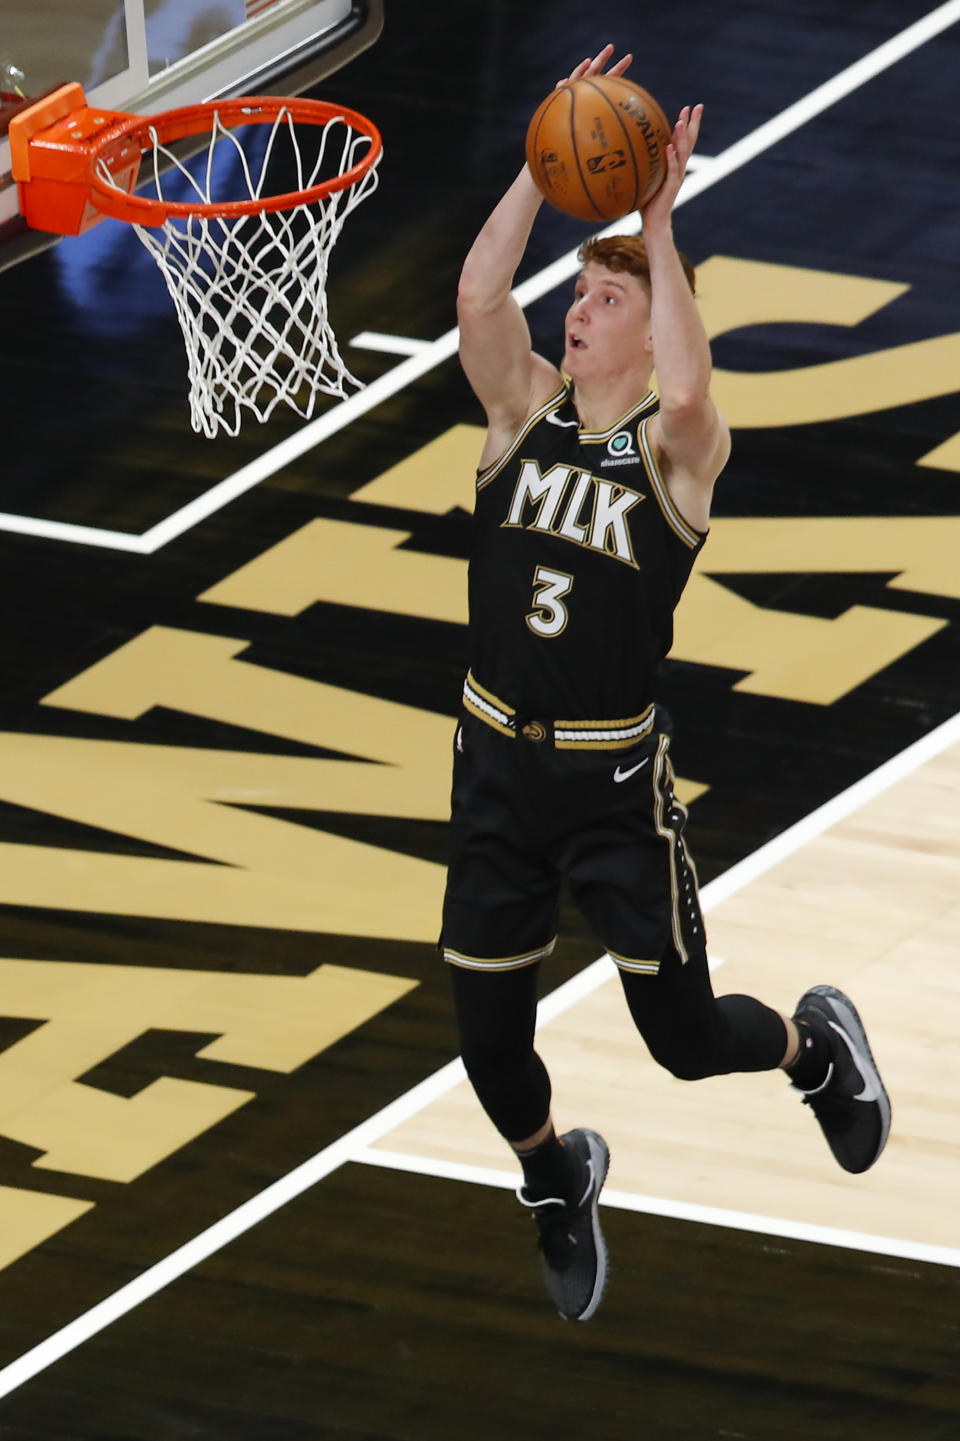 Atlanta Hawks guard Kevin Huerter (3) goes up for a shot in the first half of an NBA basketball game against the Minnesota Timberwolves on Monday, Jan. 18, 2021, in Atlanta. (AP Photo/Todd Kirkland)